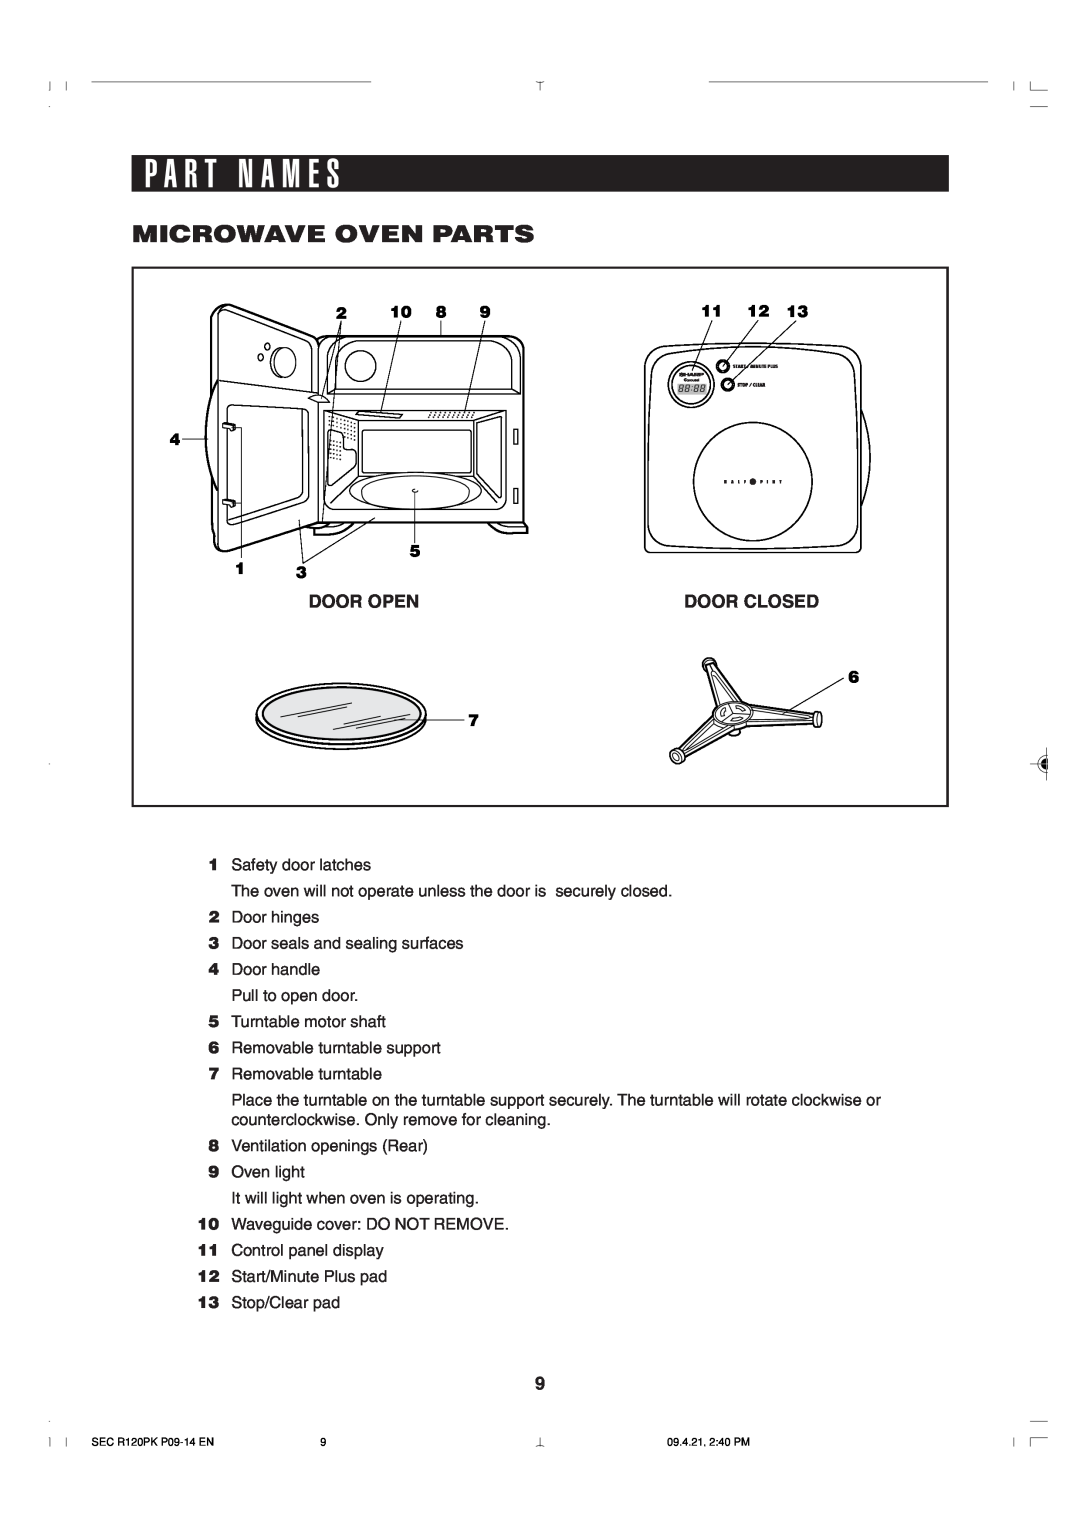 Sharp R-120PK operation manual P A R T N A M E S, Microwave Oven Parts 